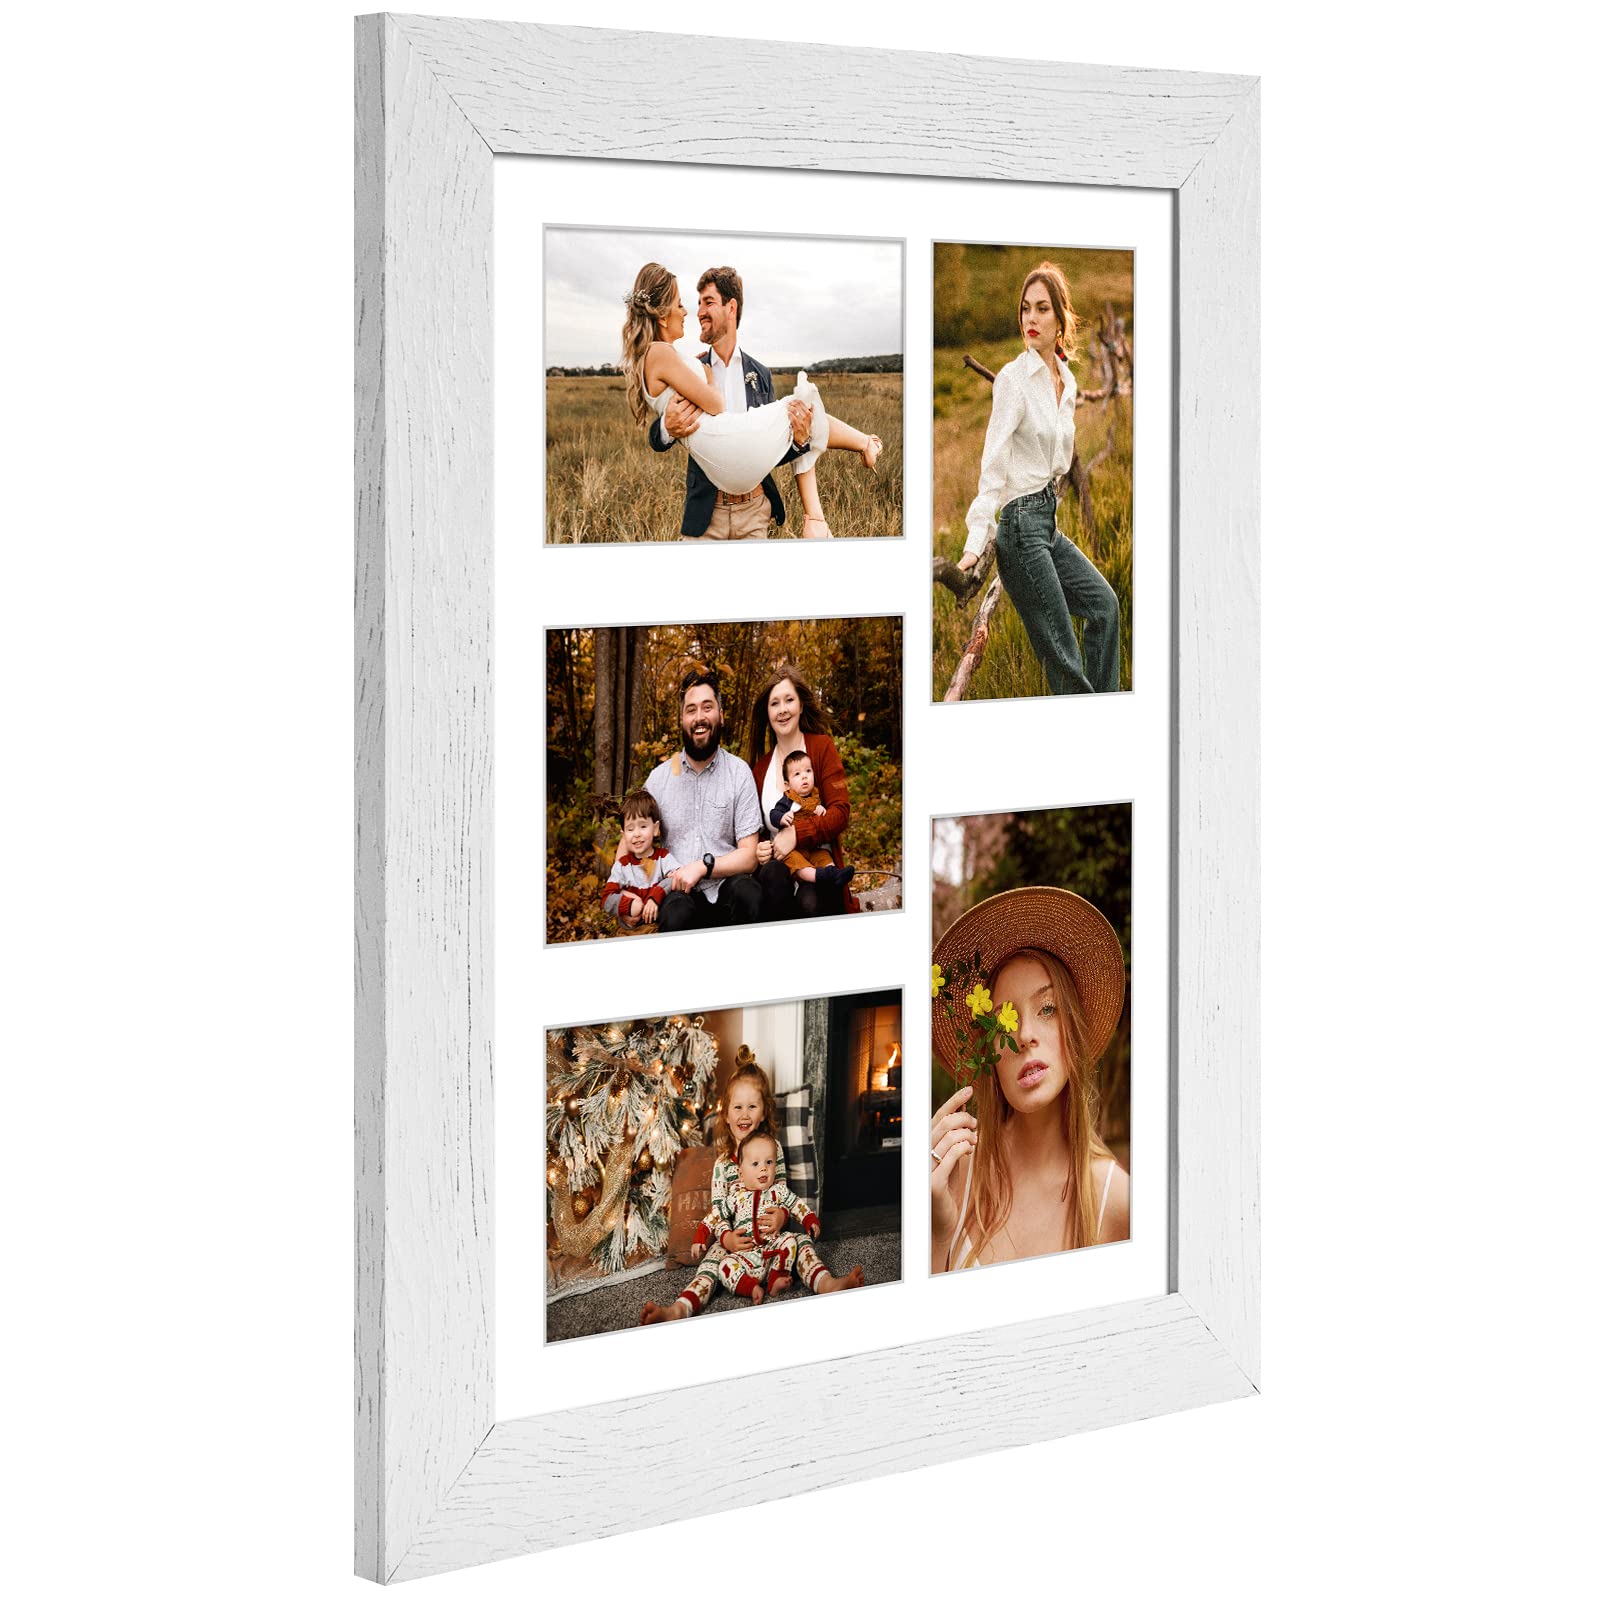 Gaevuian 13.5x15.5 Picture Frame Display 7 opening 4X6 Picture Frame  Collage,Multi Photo Frame with Mat,Plexiglass,Wall or Tabletop Decor,Gold